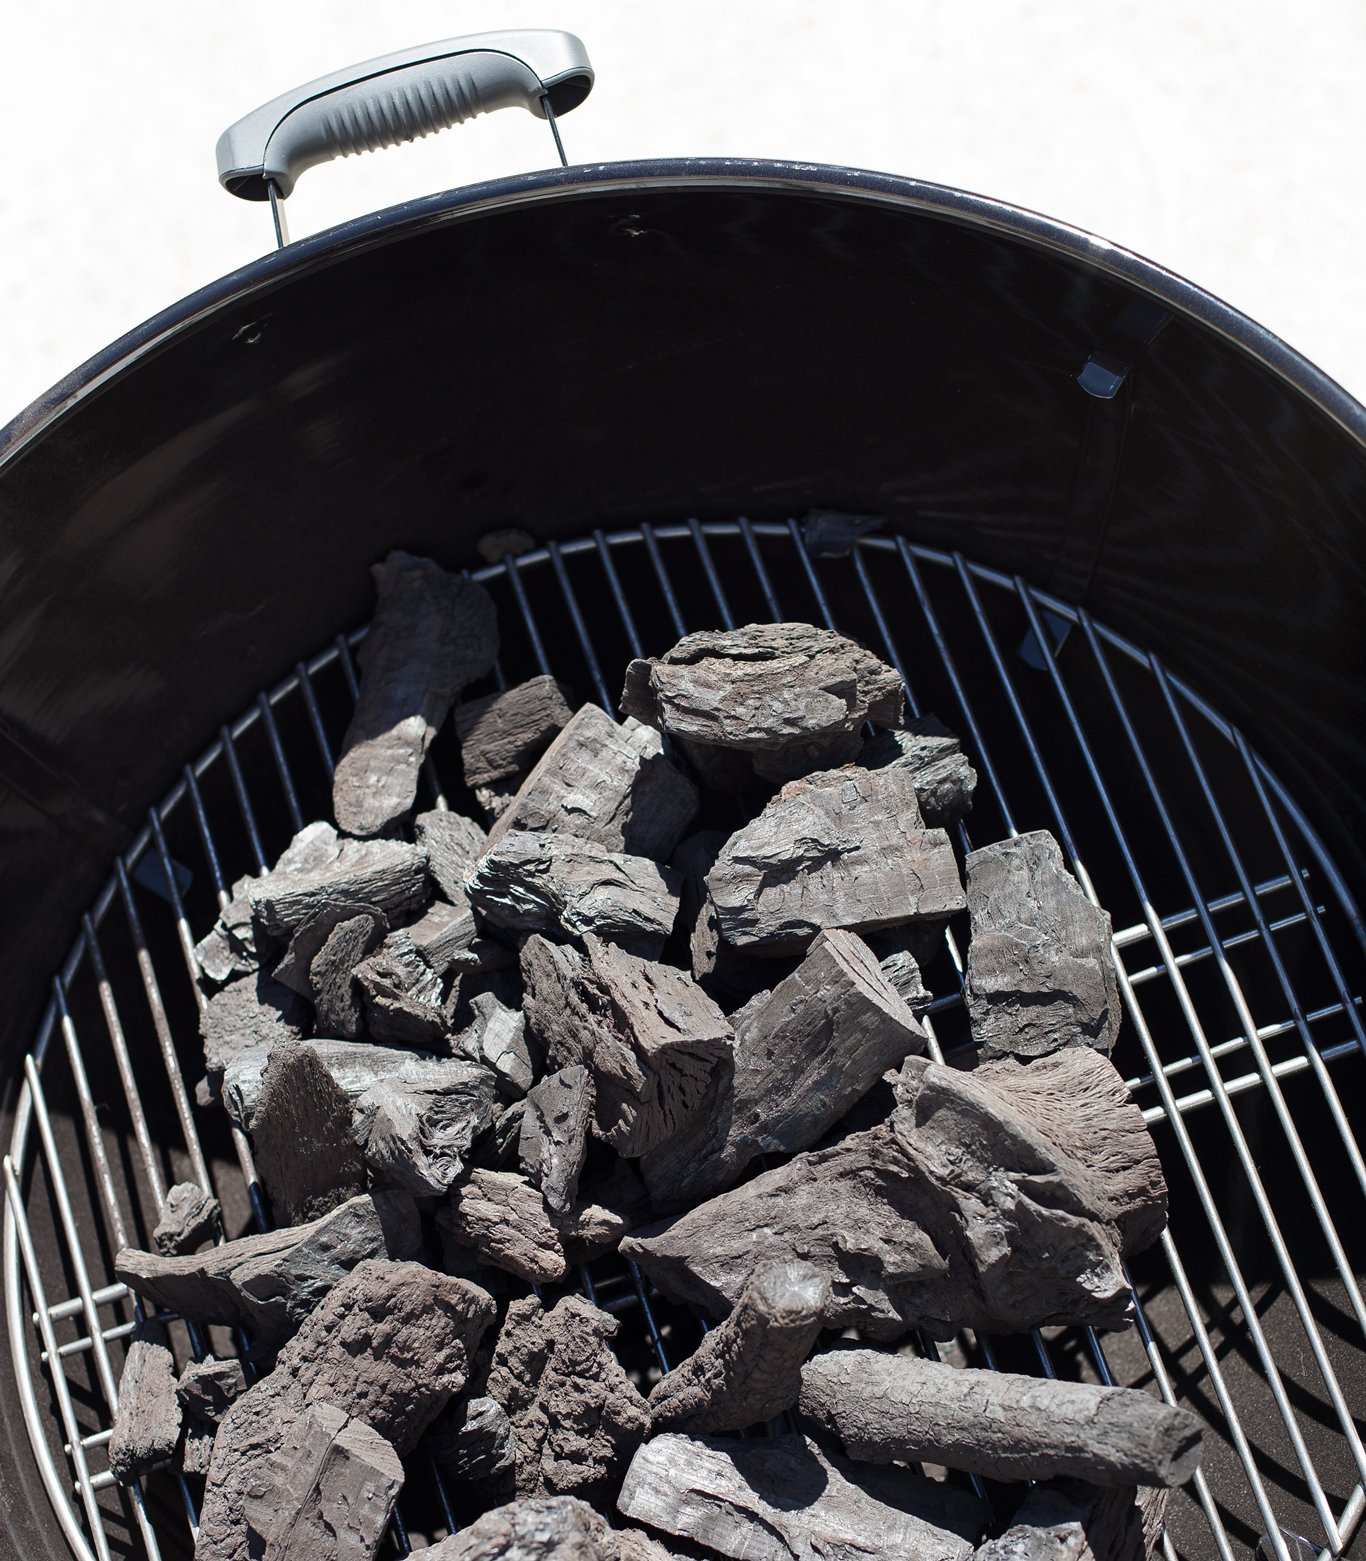 Coals arranged in the center of a grill.